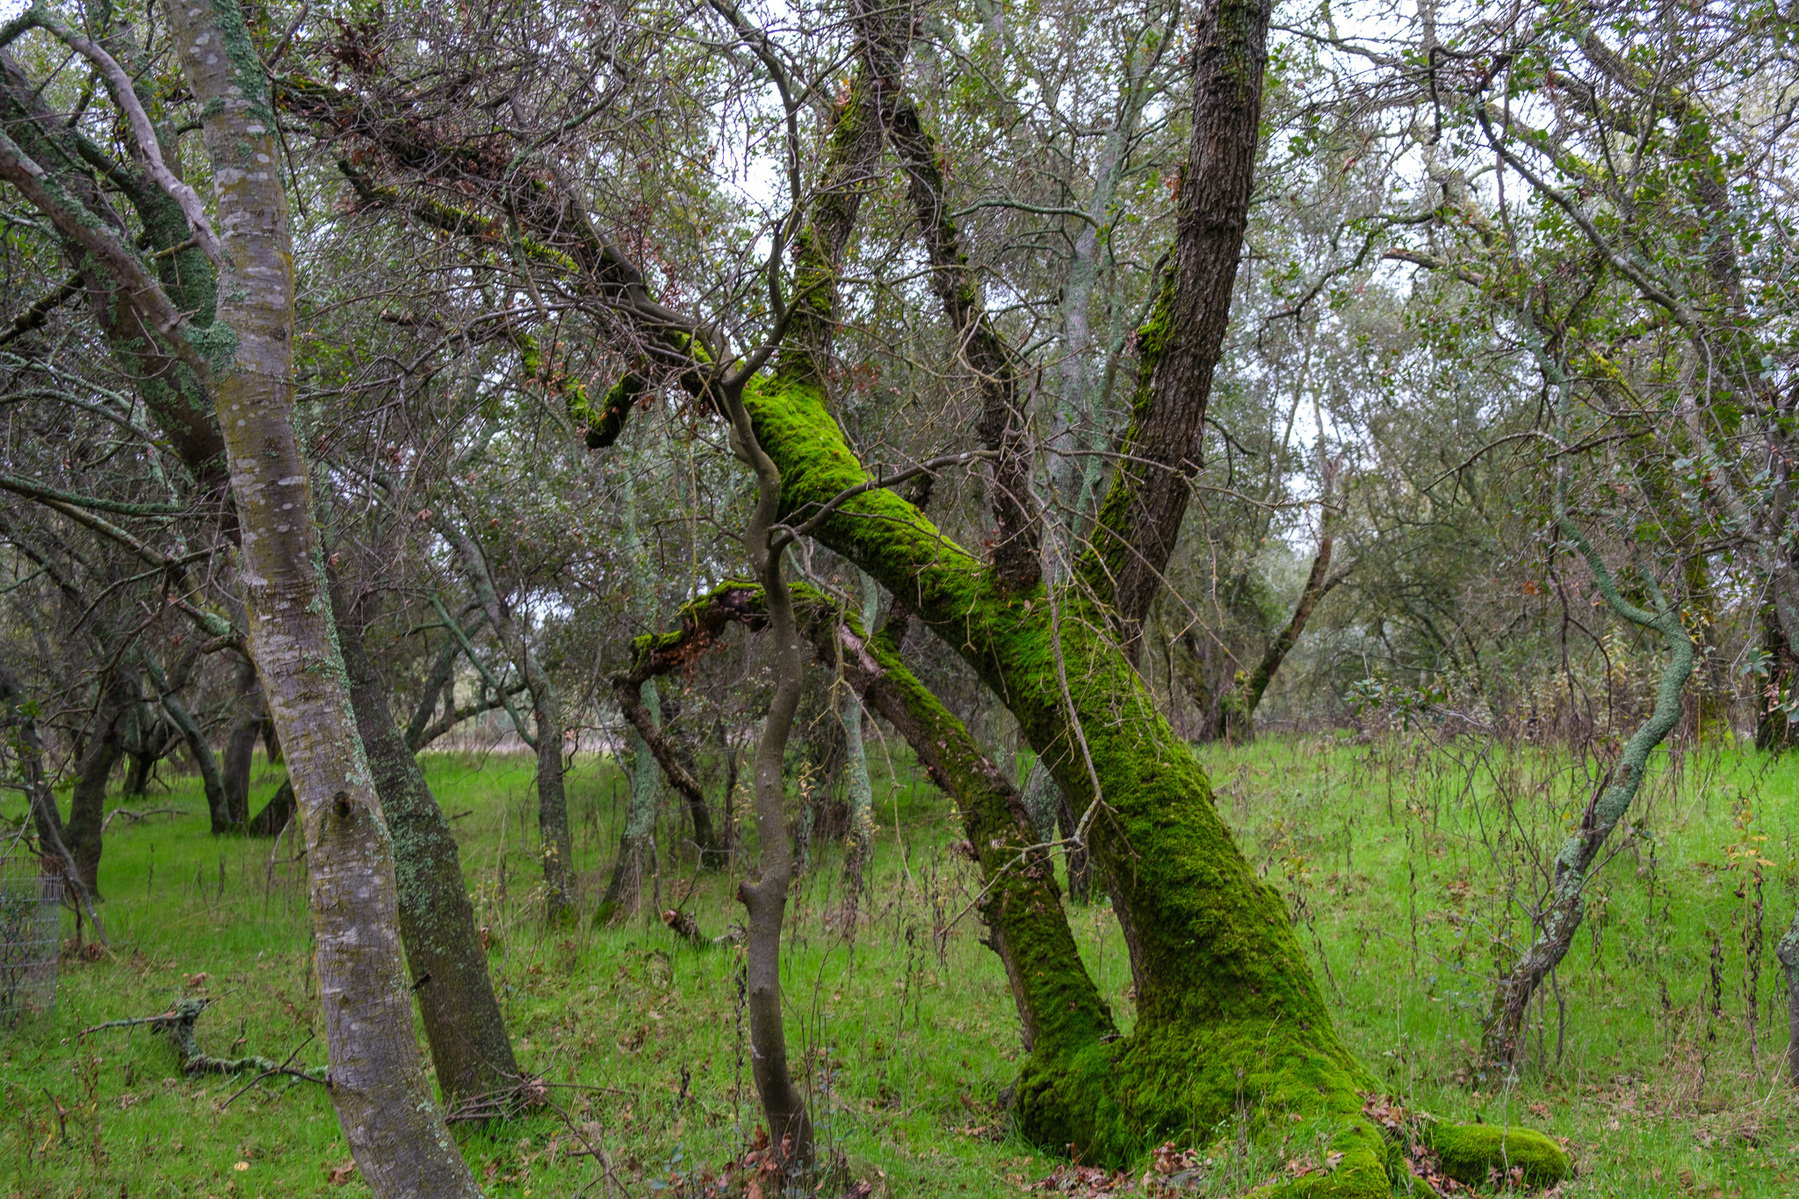 A tree grows slanted to the left of frame. Moss grows on the lower third of the tree trunk. 